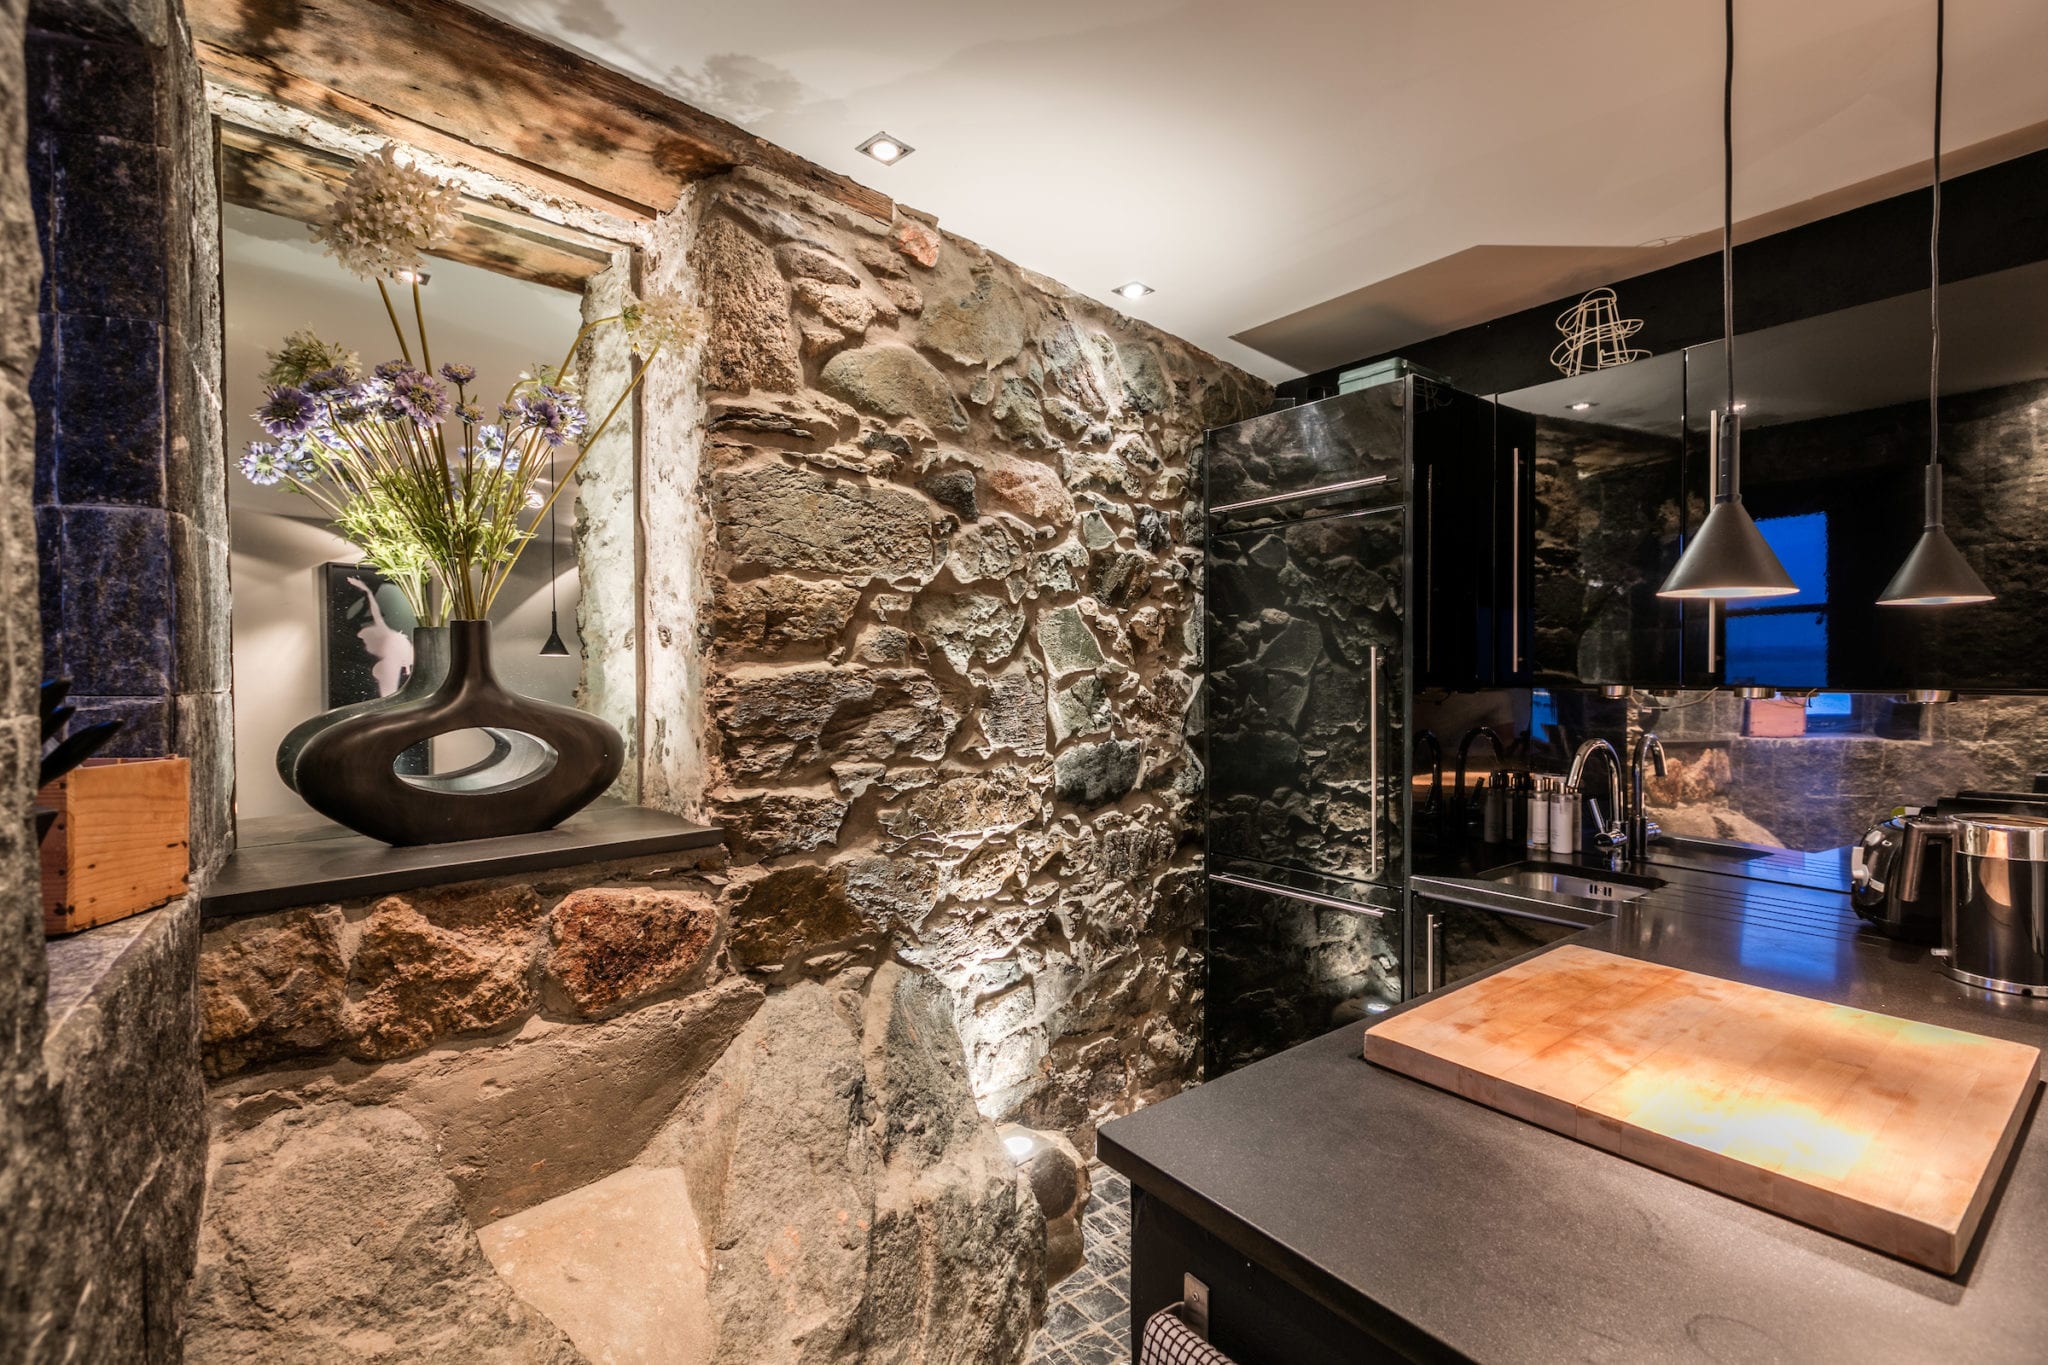 A kitchen with matte black surfaces, exposed stone and feature lighting